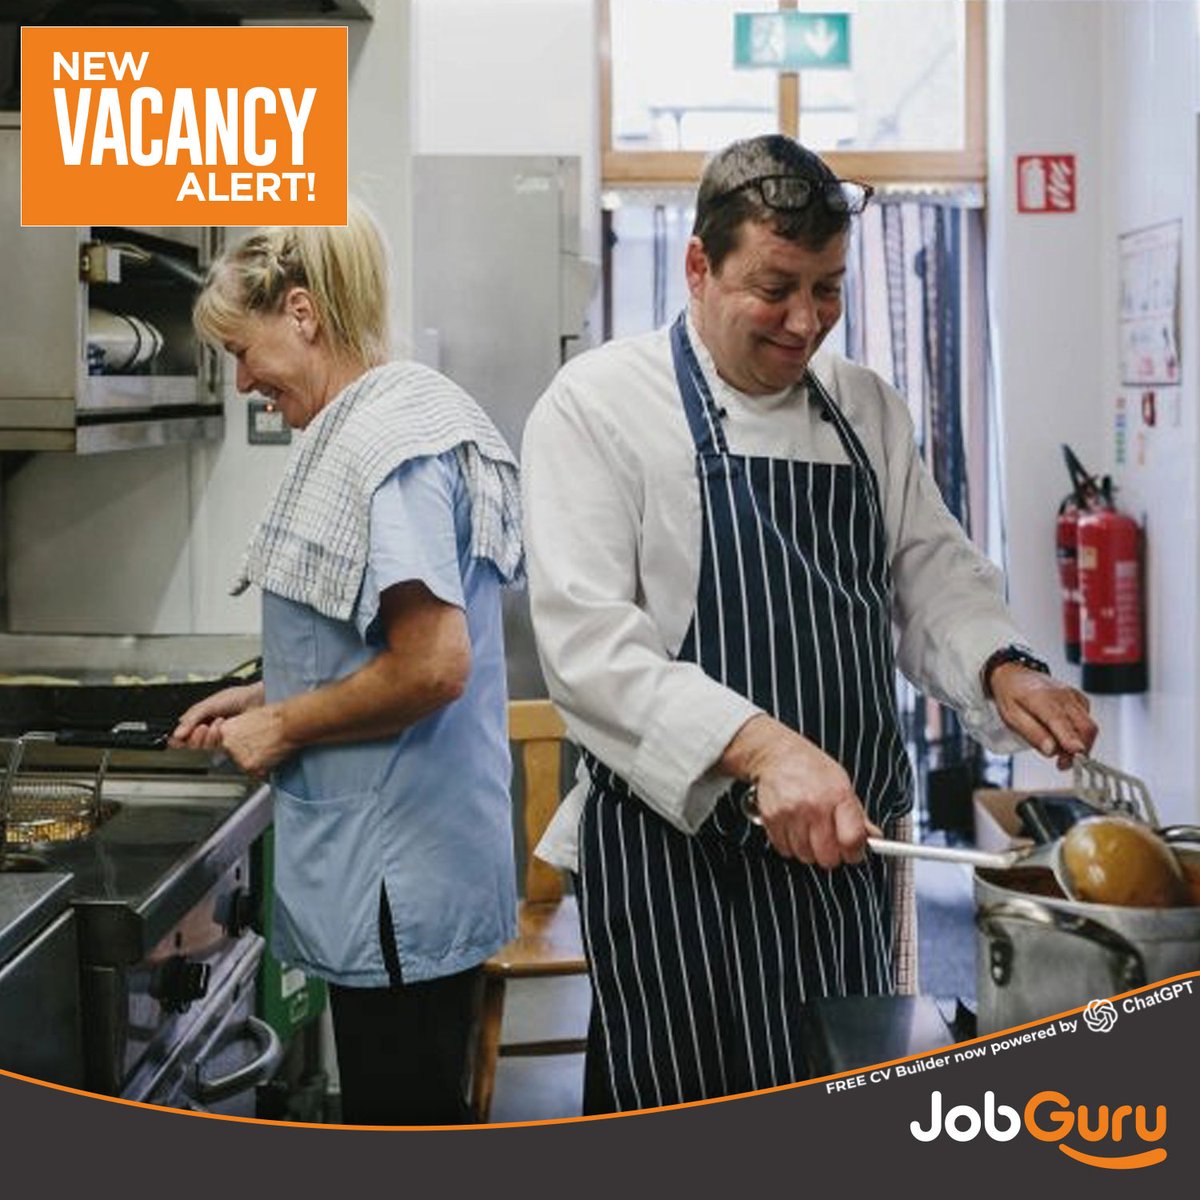 🌟 Join Depaul Charity as a Relief Chef in Co. Waterford! 🍽️✨ Full-time, permanent role offering €16.40 per hour. Embrace our values-led approach and make a difference in the community. Apply now! #DepaulCharity #Chef #WaterfordJobs 🥗👨‍🍳 jobguru.ie/vacancy/relief…